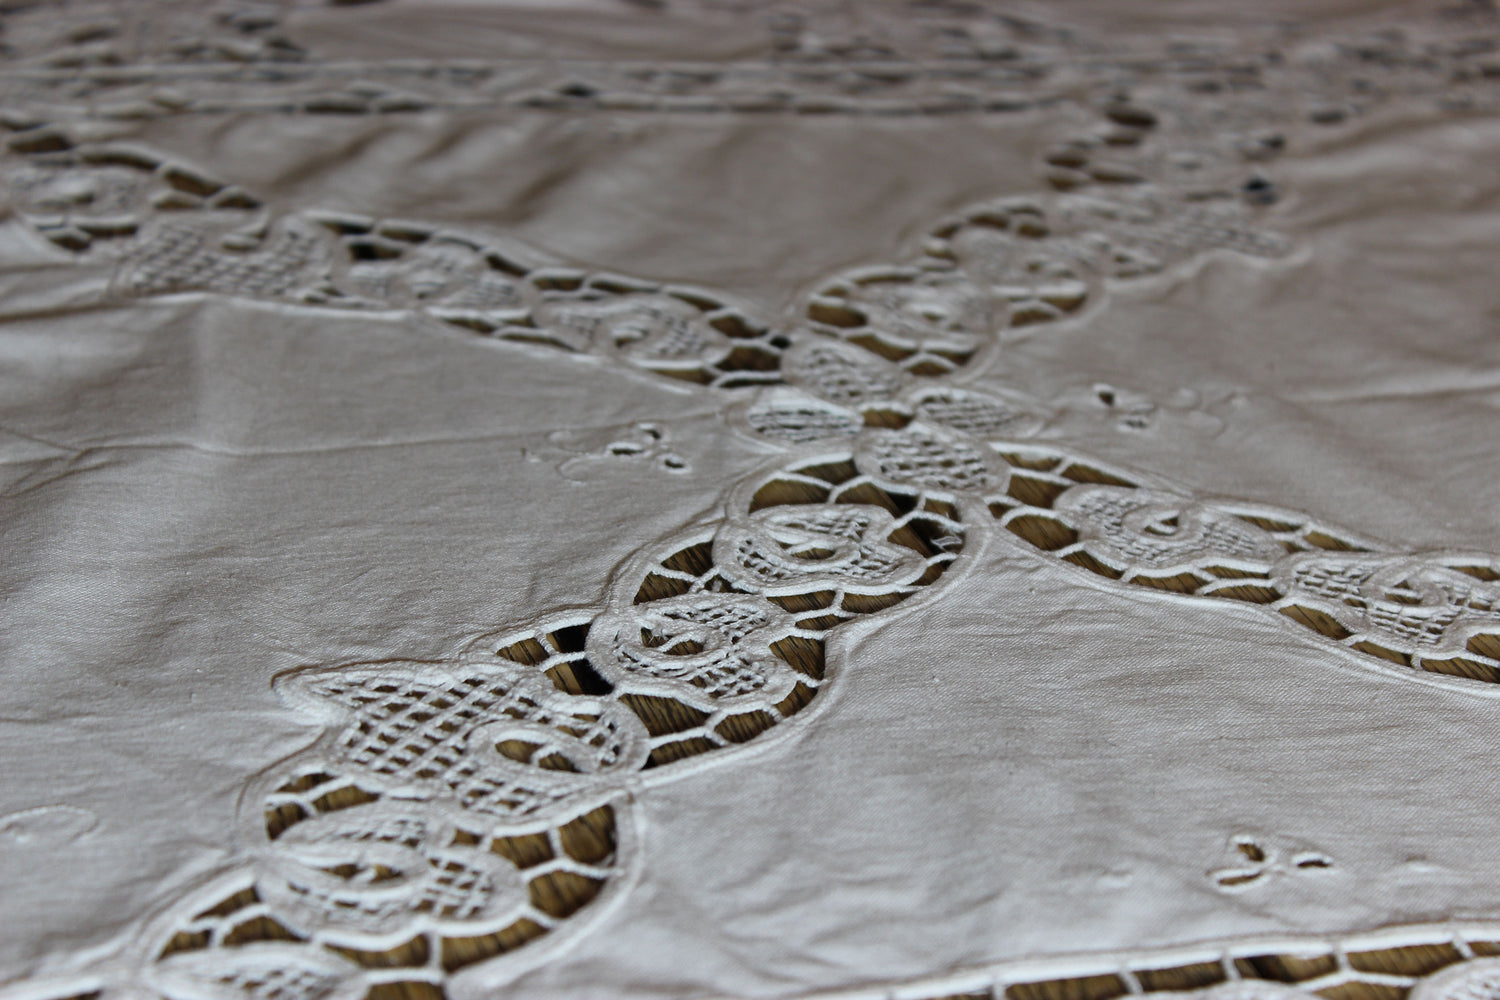 Hand Stitched Linen and Battenberg Lace Tablecloth